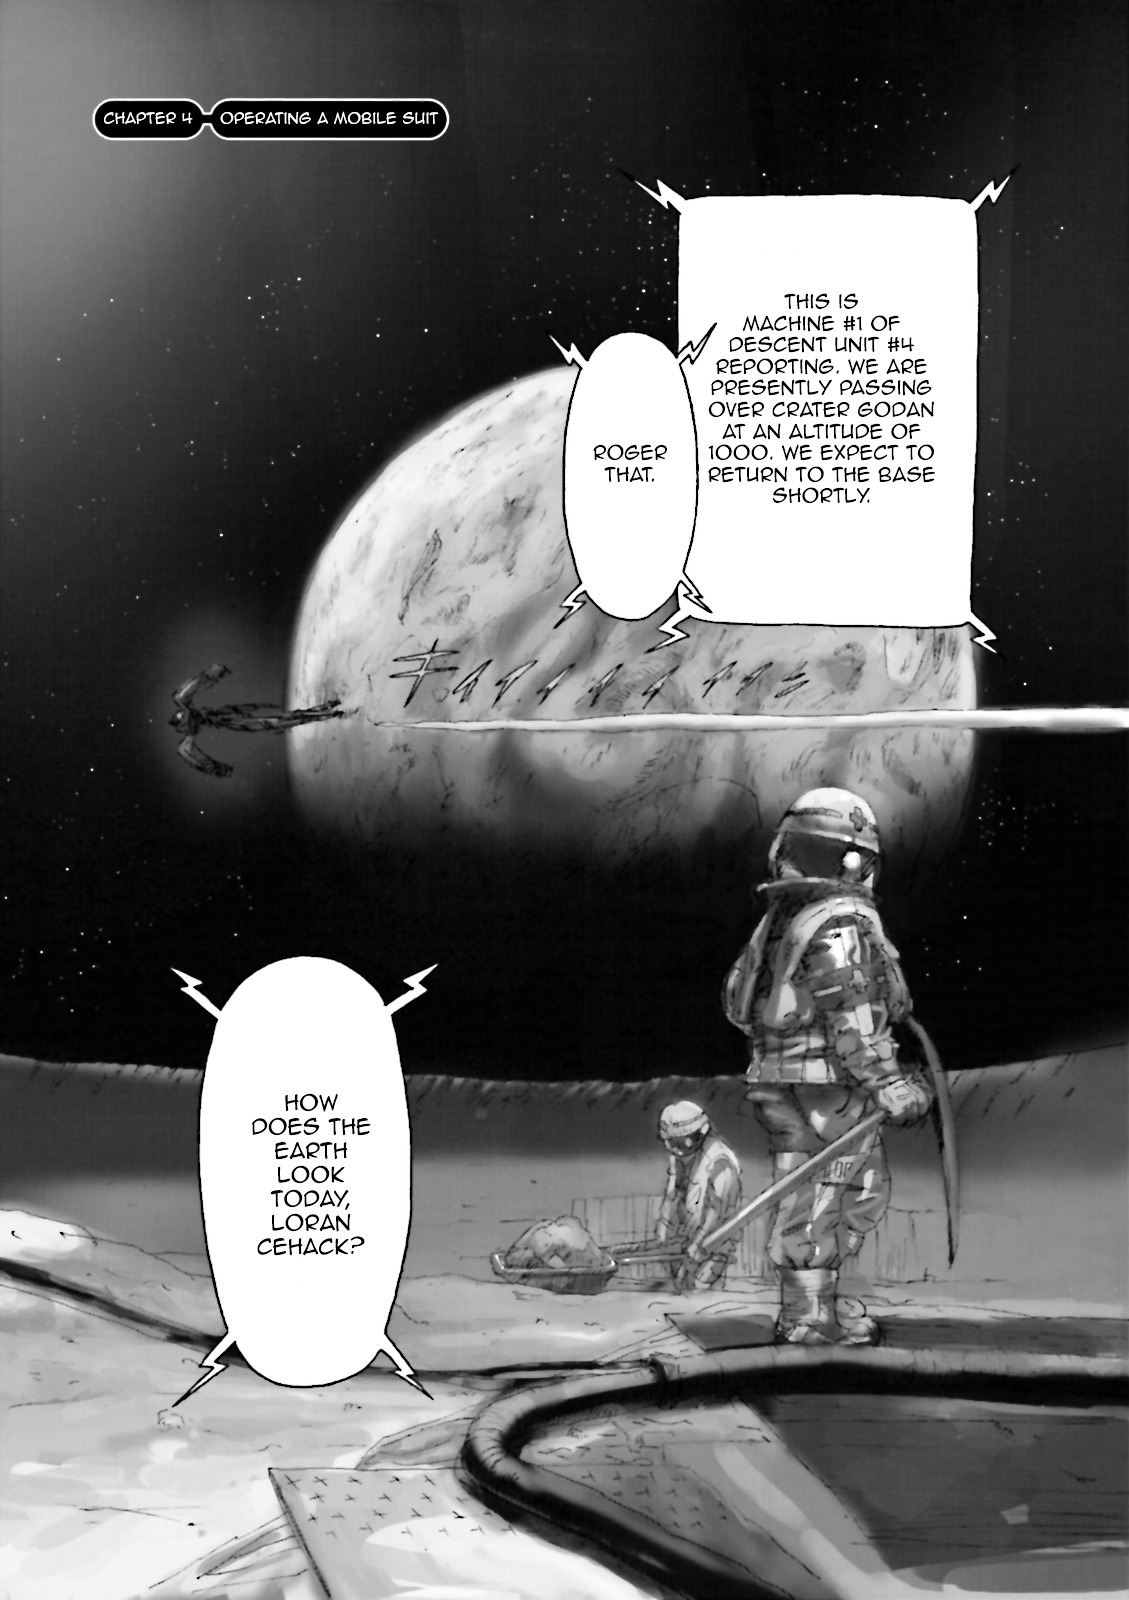 Turn A Gundam: Wind Of The Moon Chapter 04 : Operating A Mobile Suit - Picture 1